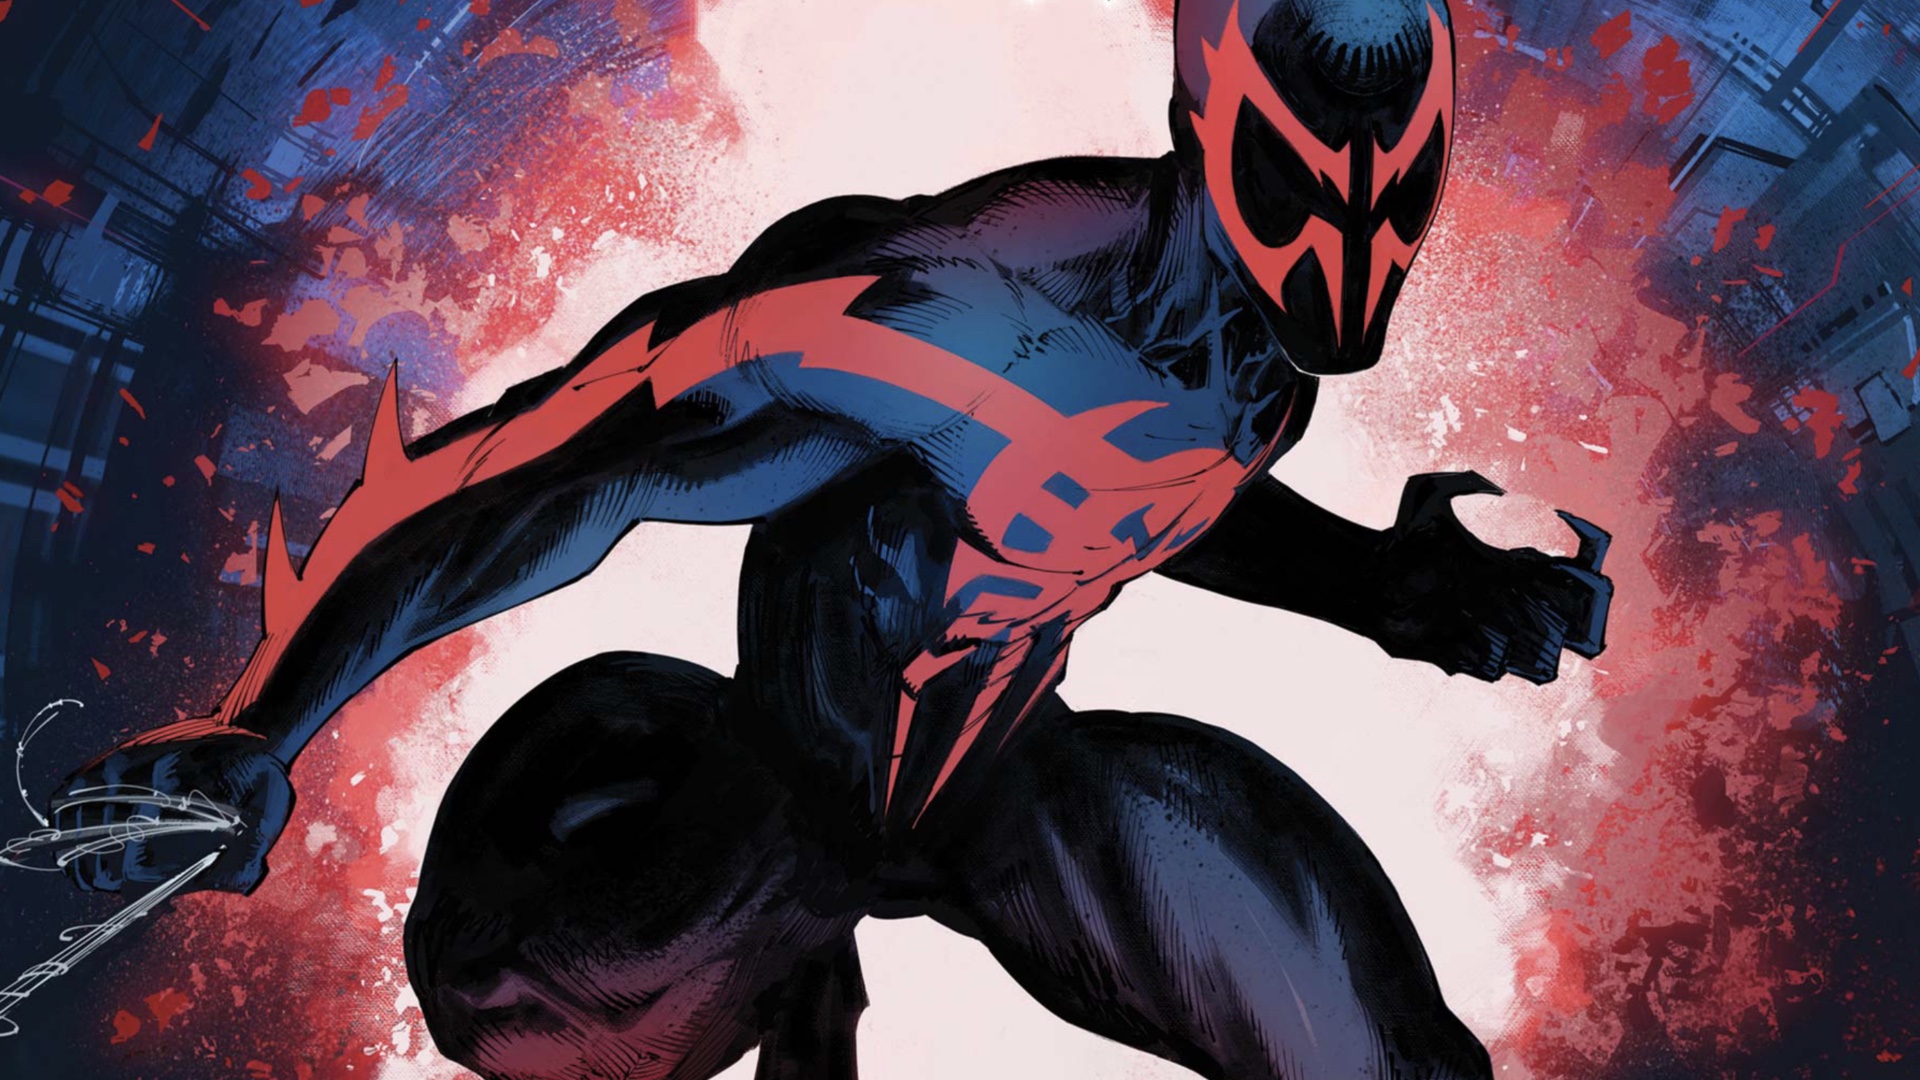 Marvel Comics gears up to celebrate 30 years of Spider-Man 2099 in 2022 |  GamesRadar+